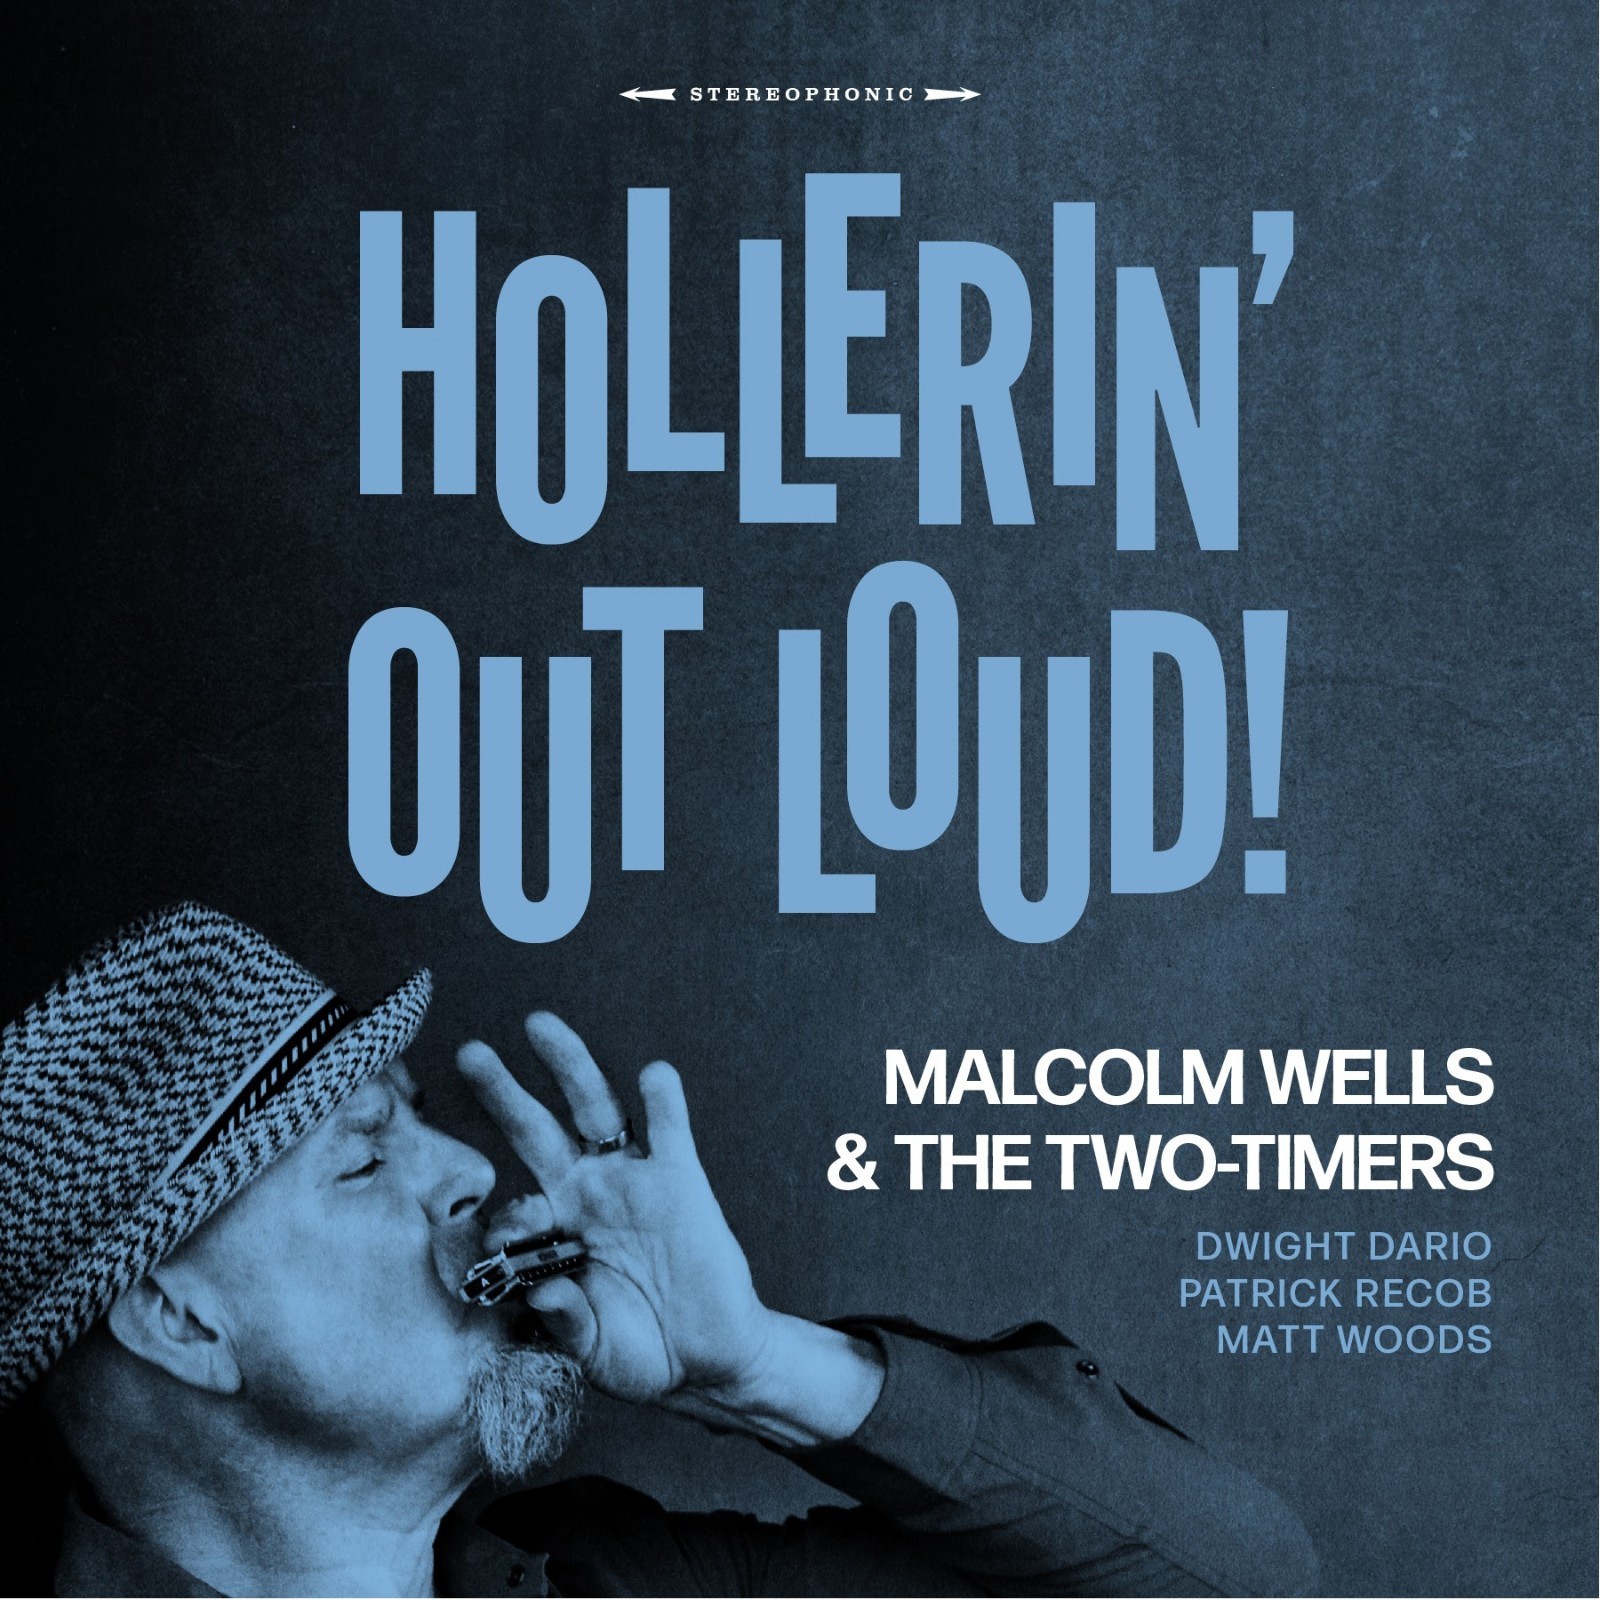 Malcolm Wells & The Two-Timers – Hollerin’ Out Loud